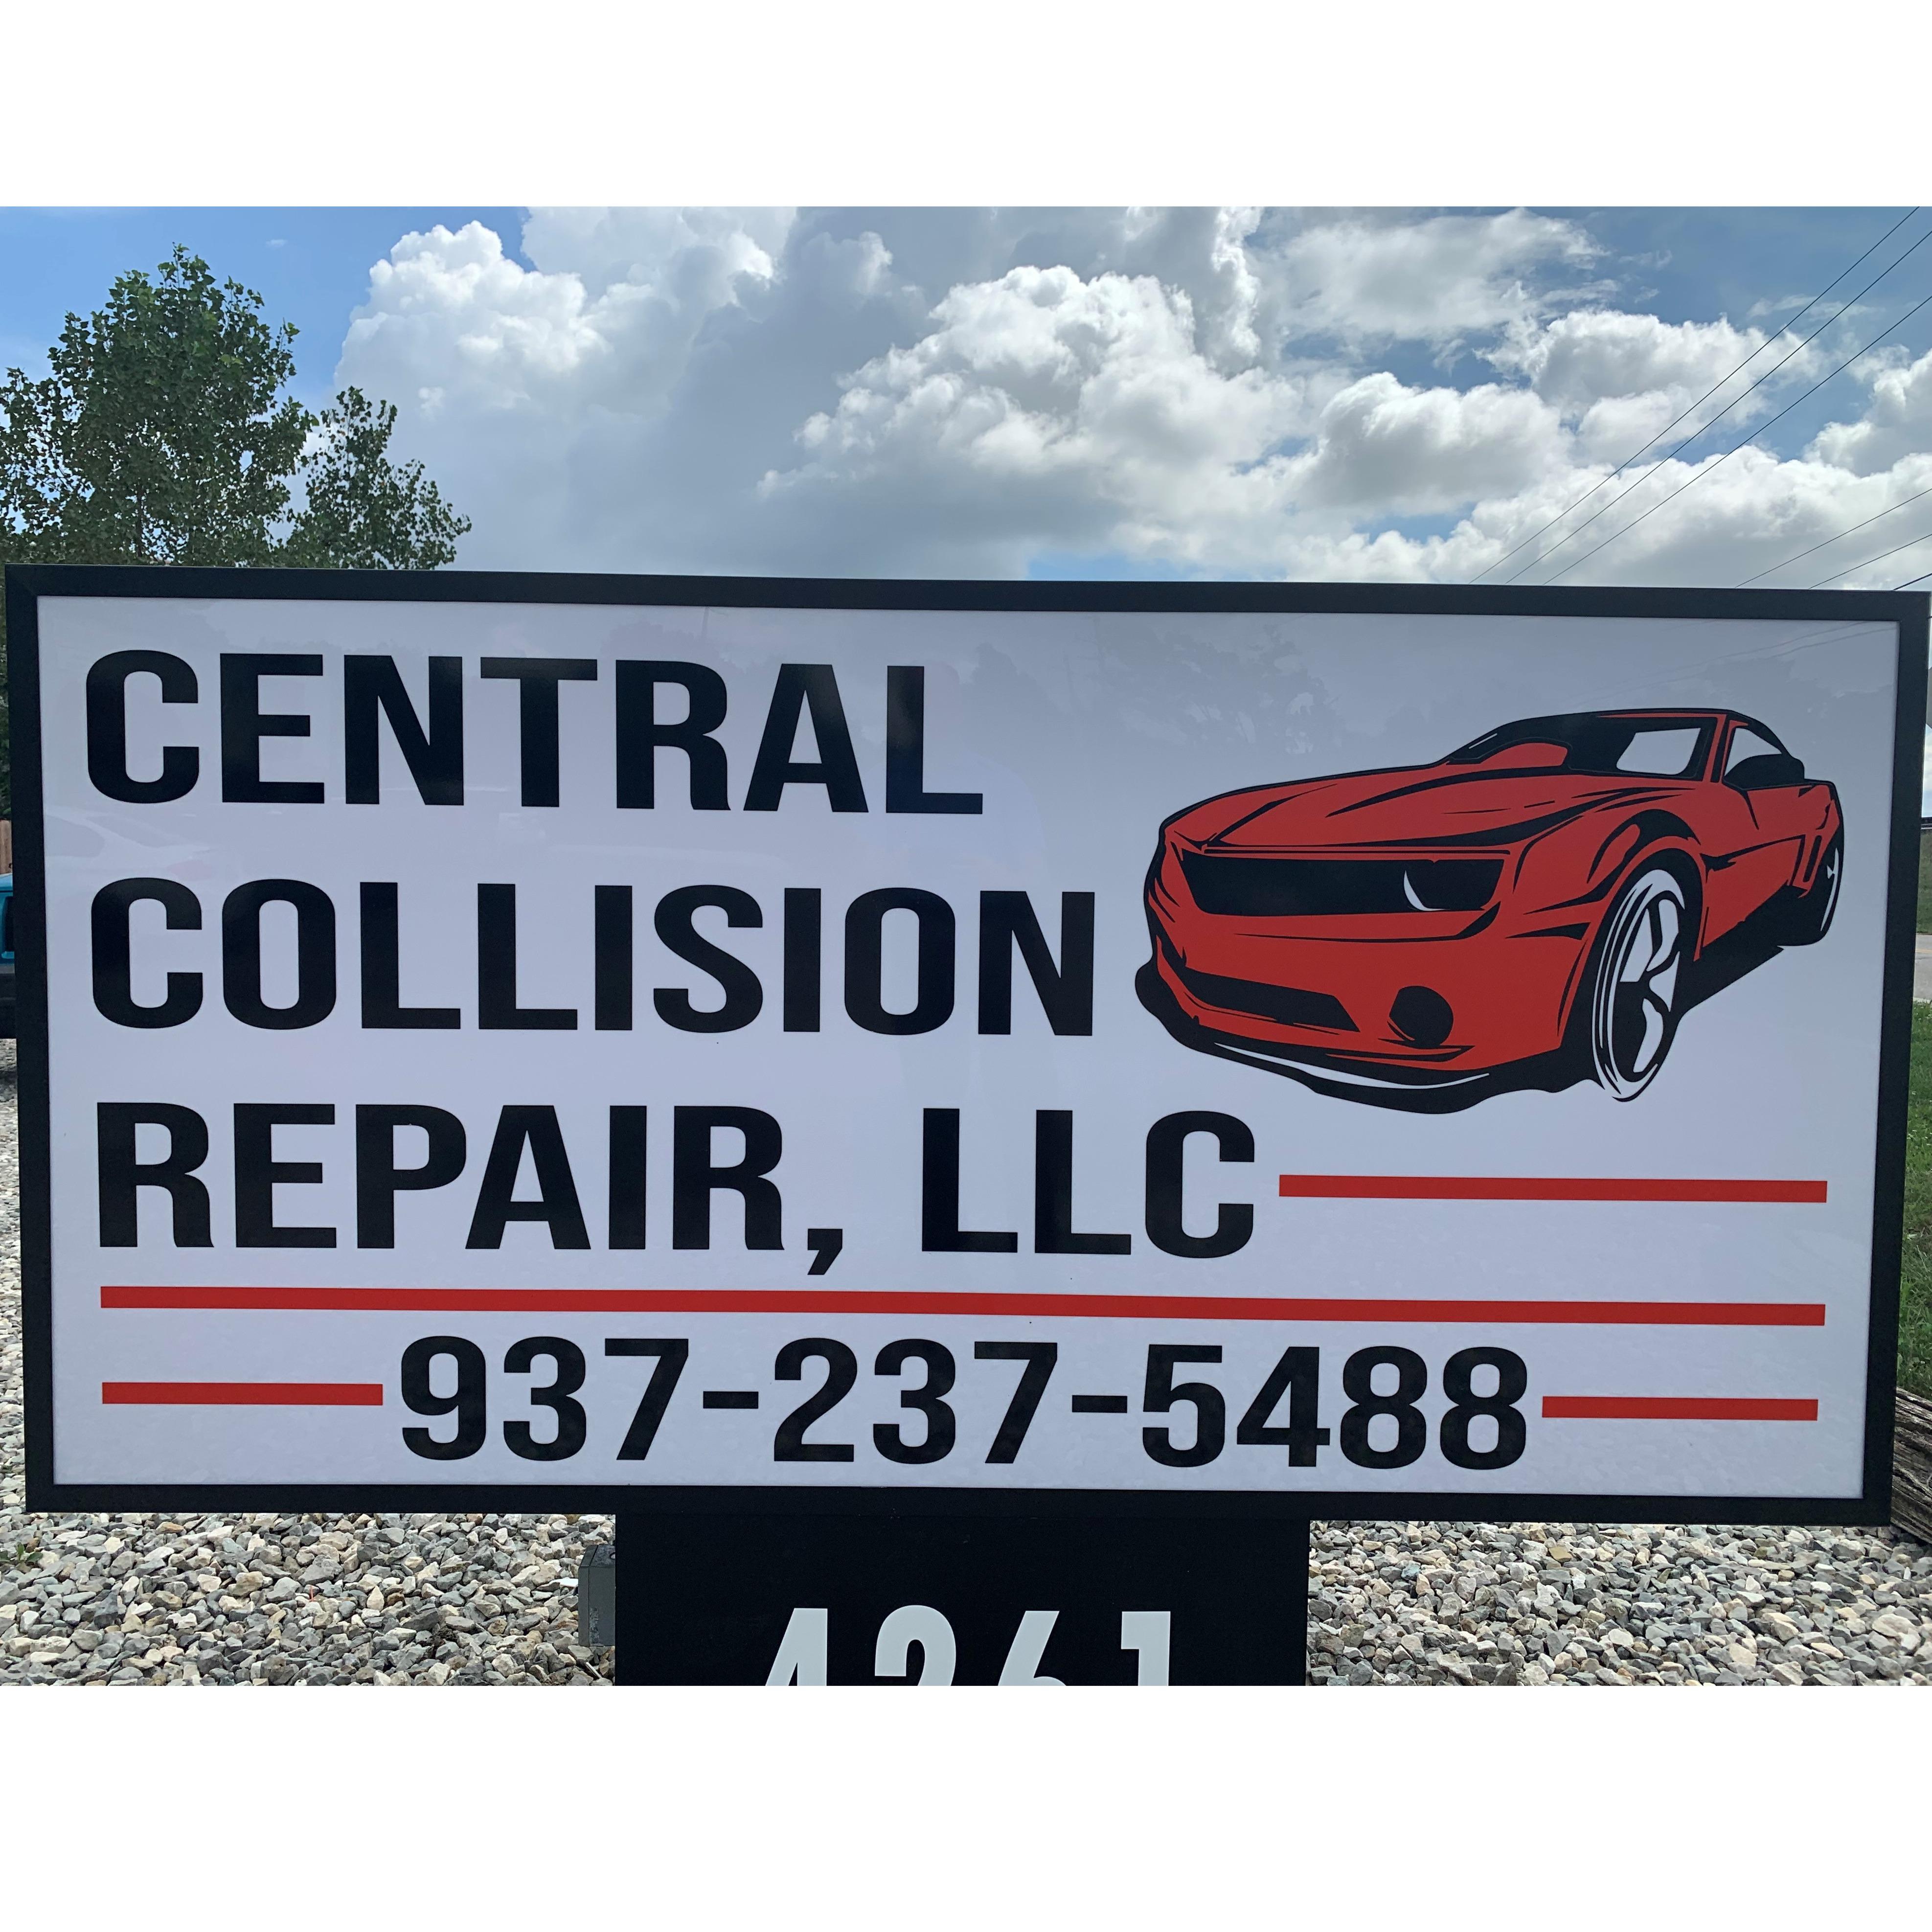 Central Collision Repair, LLC - Huber Heights, OH 45424-2433 - (937)237-5488 | ShowMeLocal.com